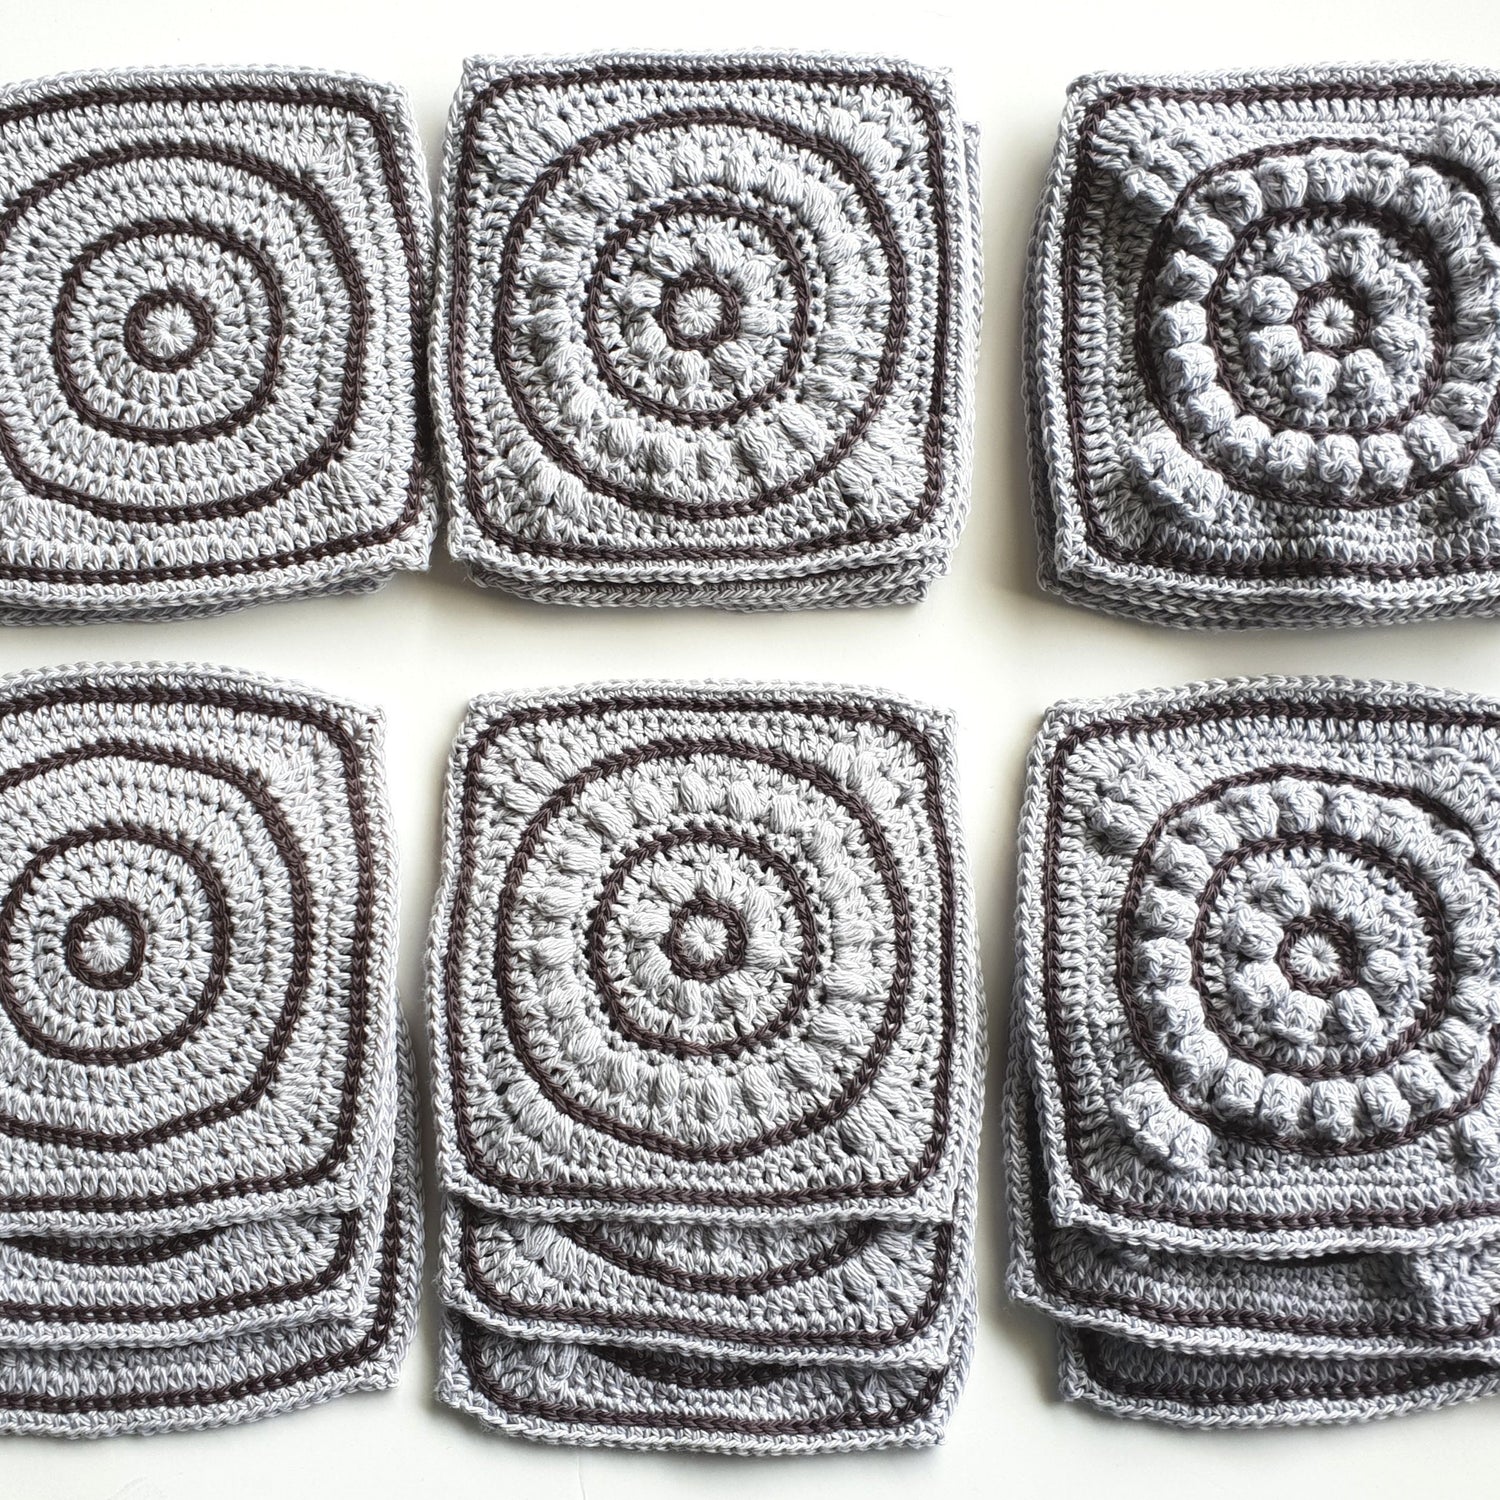 Granny squares from Beneath the Surface by Shelley Husband